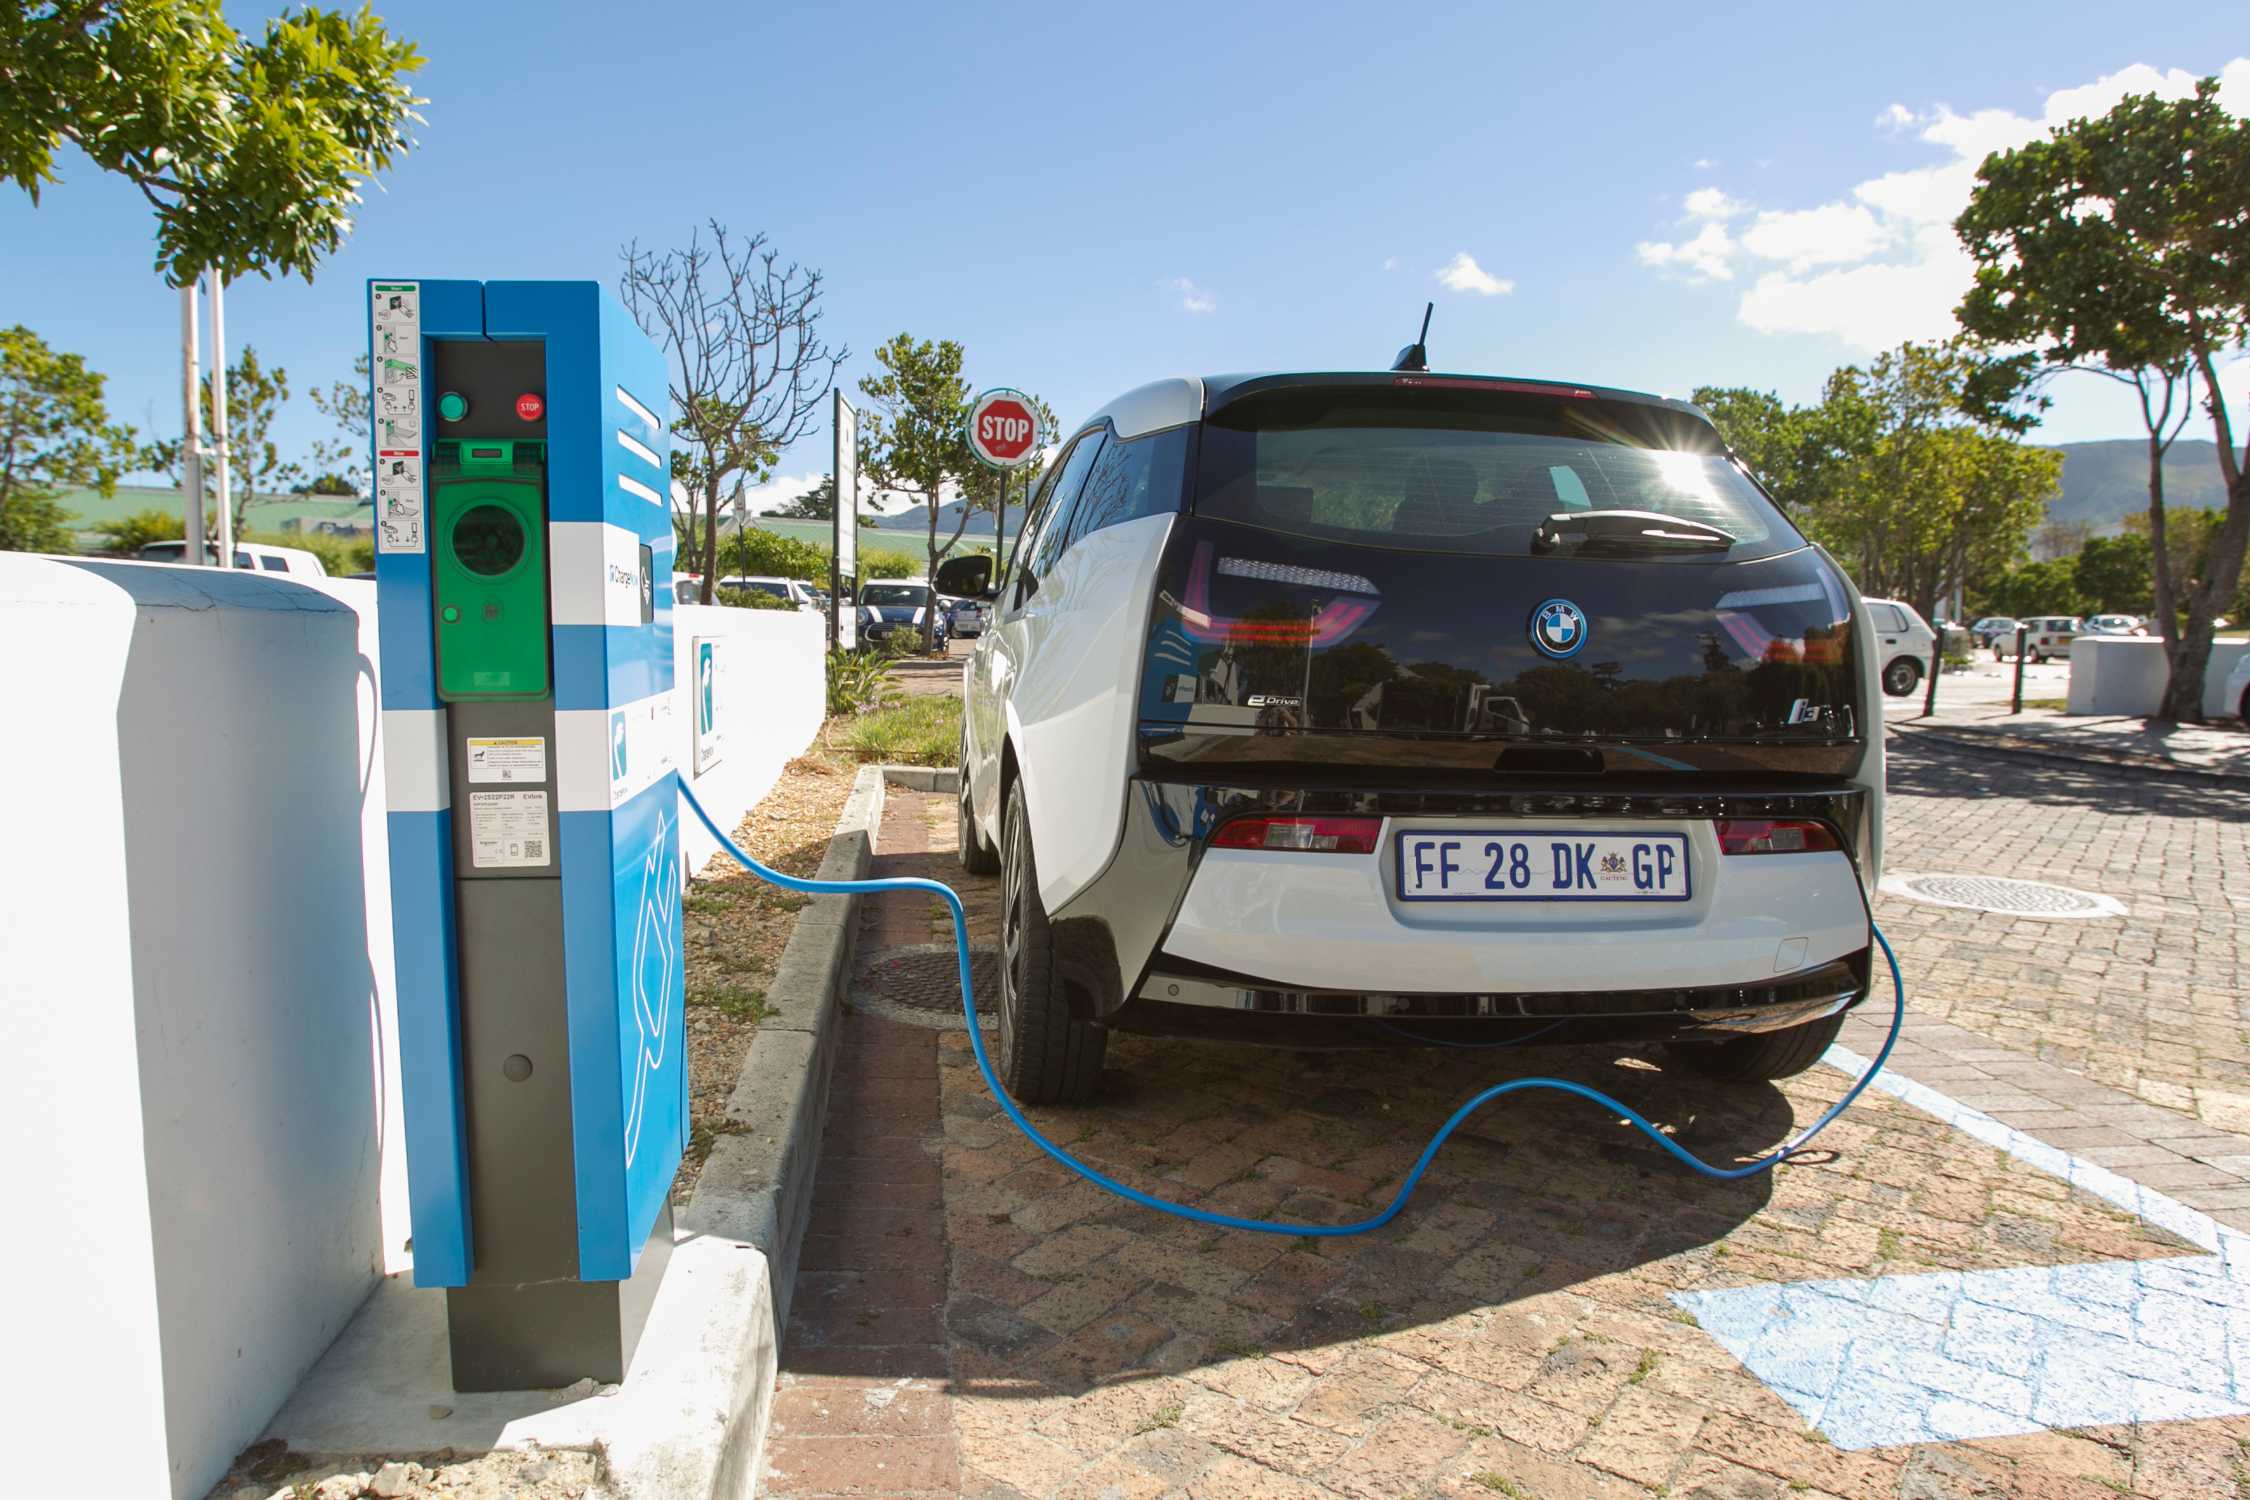 The new electric vehicle charging station at Constantia Village in Cape